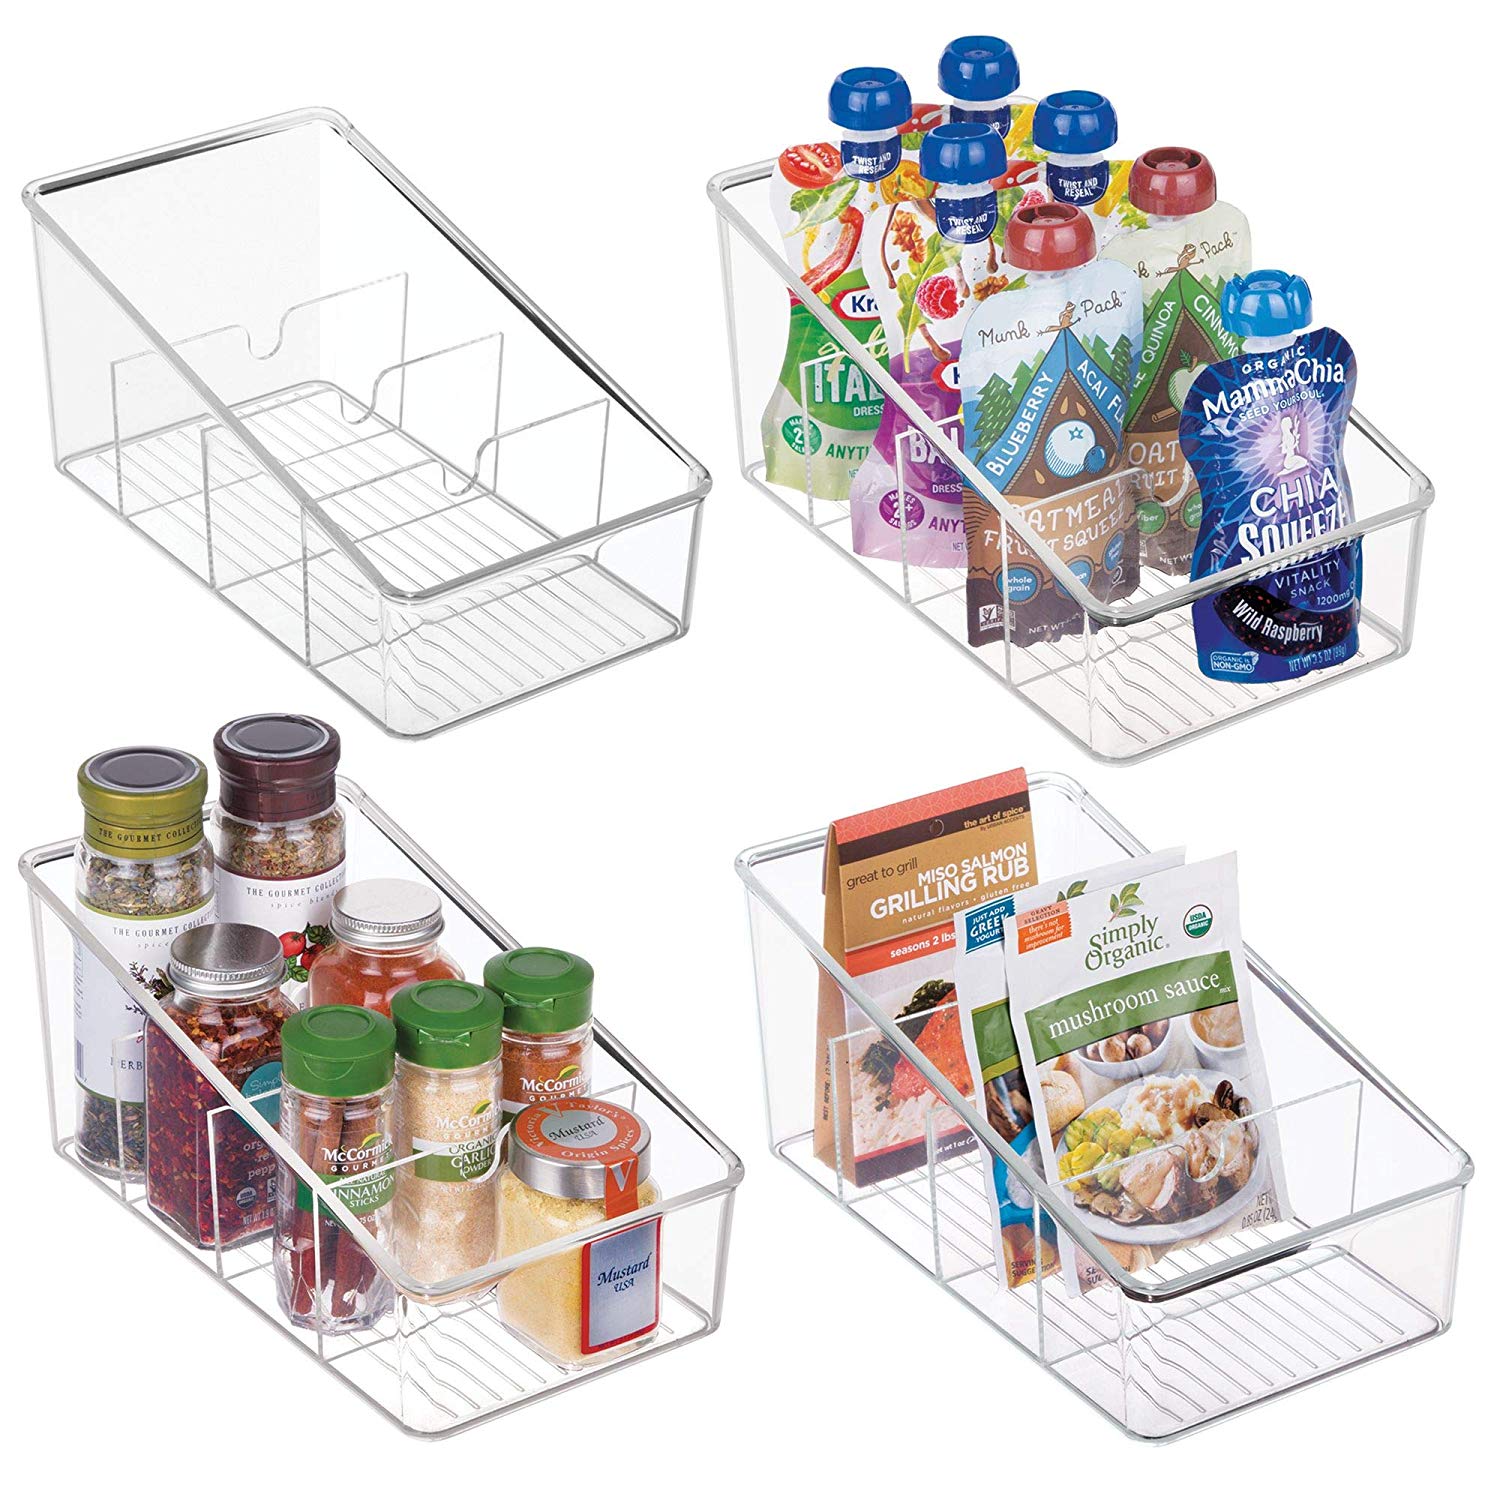 mDesign Plastic Food Packet Organizer Bin Caddy - Storage Station for Kitchen, Pantry, Cabinet, Countertop - Holds Spice Pouches, Dressing Mixes, Hot Chocolate, Tea, Sugar Packets - 4 Pack, Clear